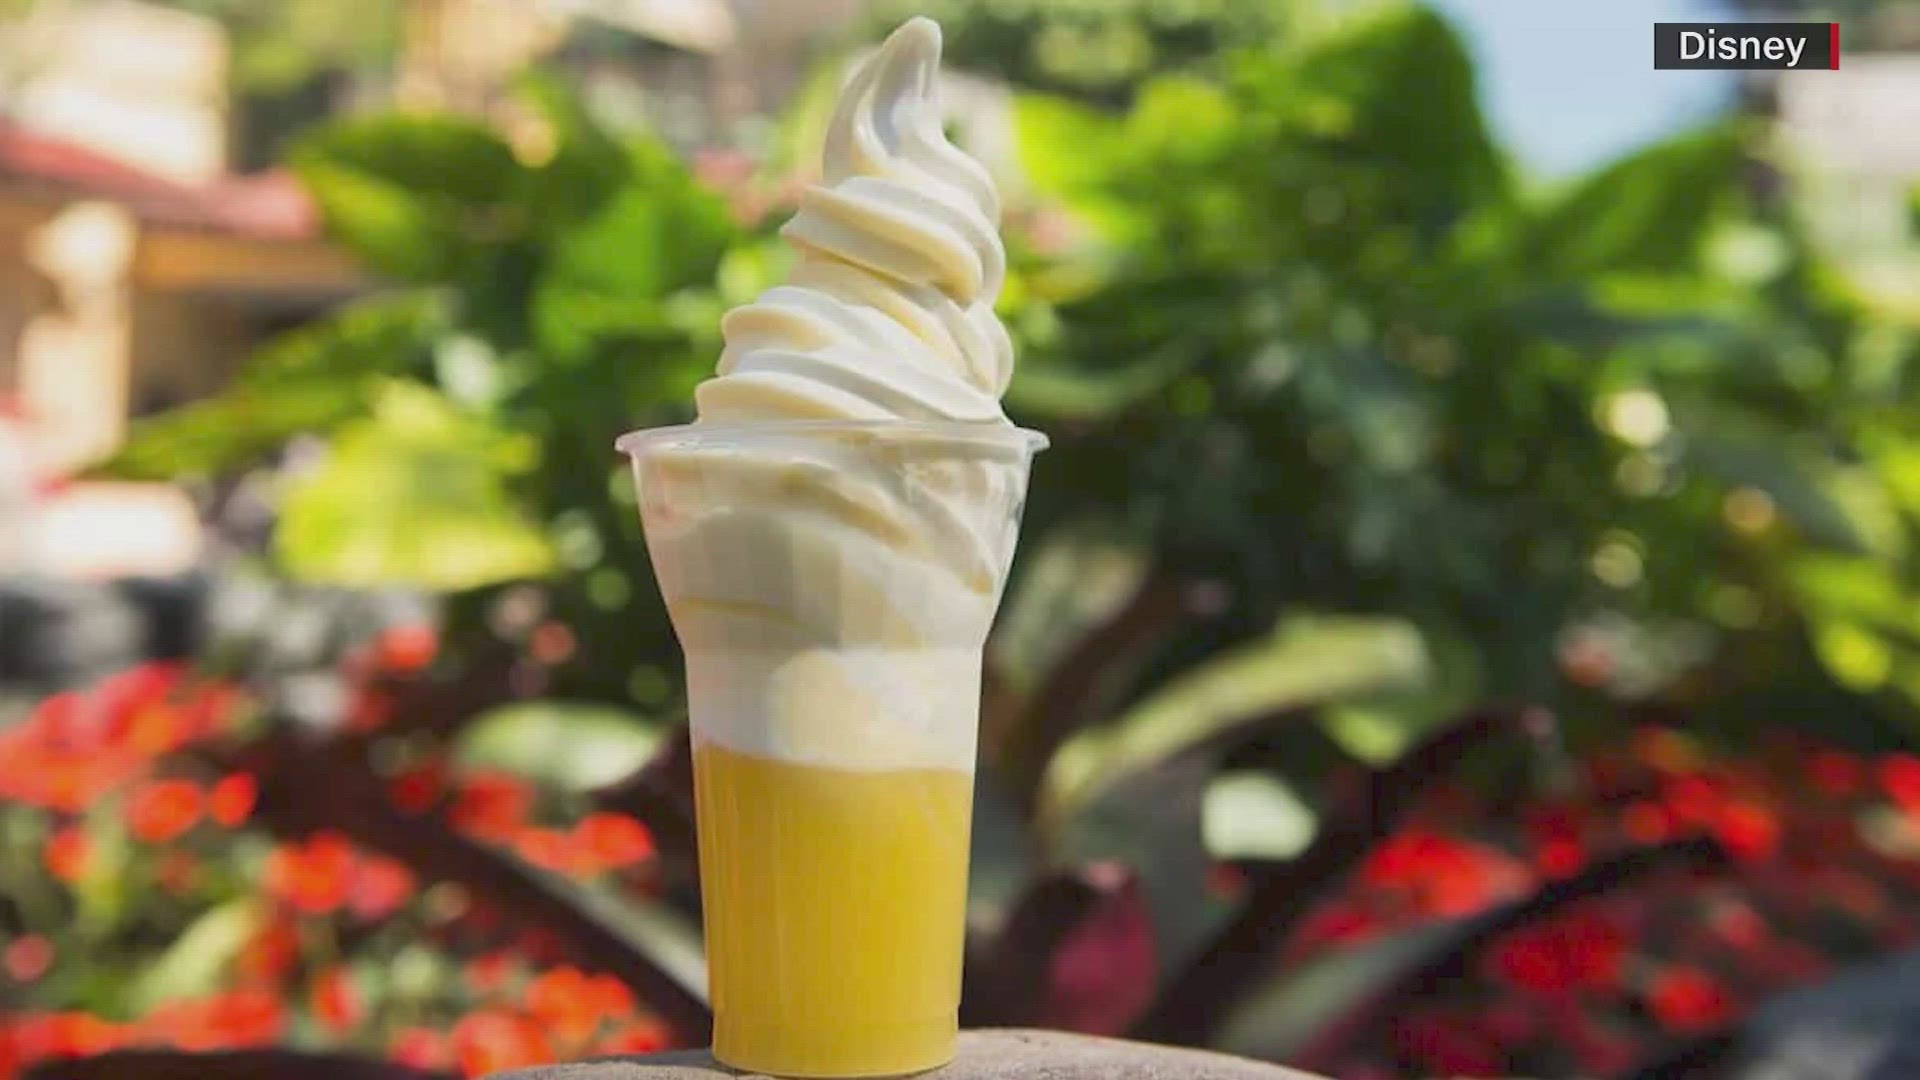 Dole Whip, a tropical soft serve from Disney Parks, will now be sold in stores nationwide.